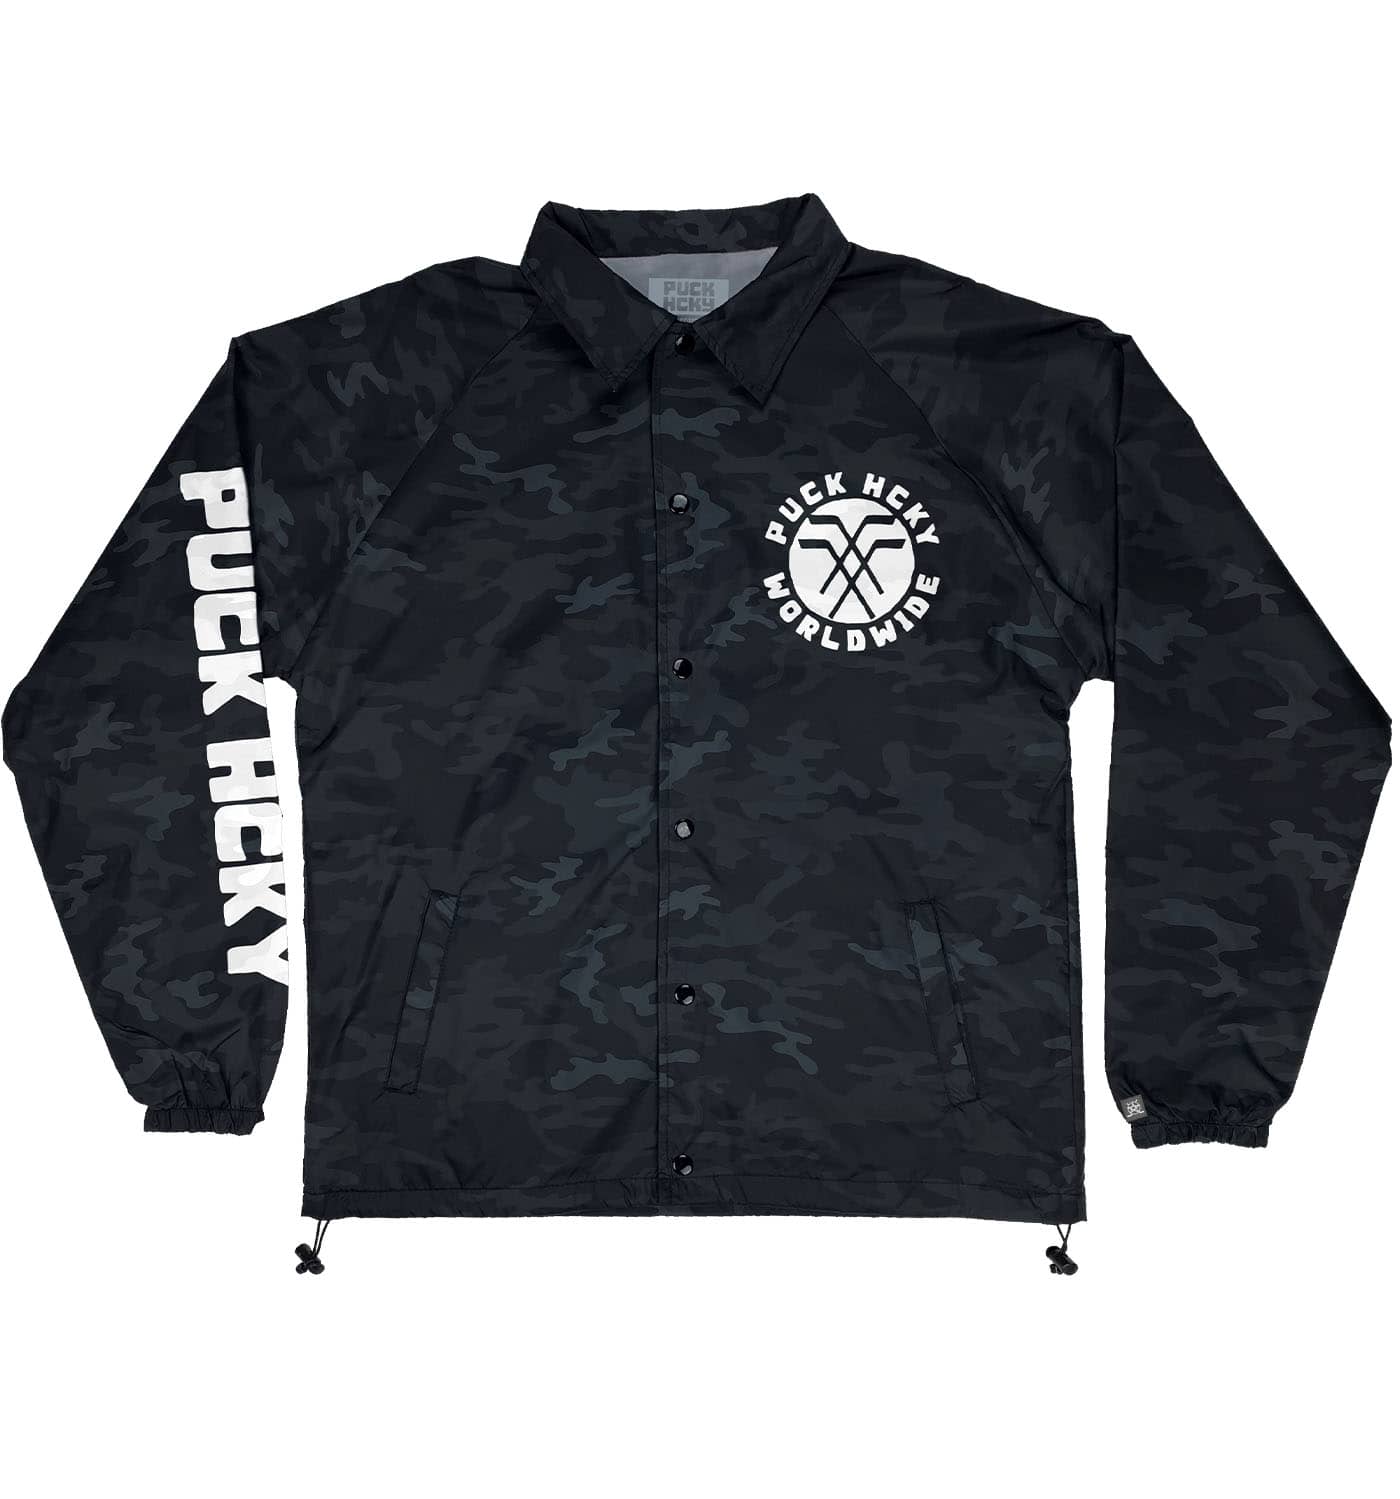 PUCK HCKY 'NU STIX' hockey coaches jacket in black camo front view